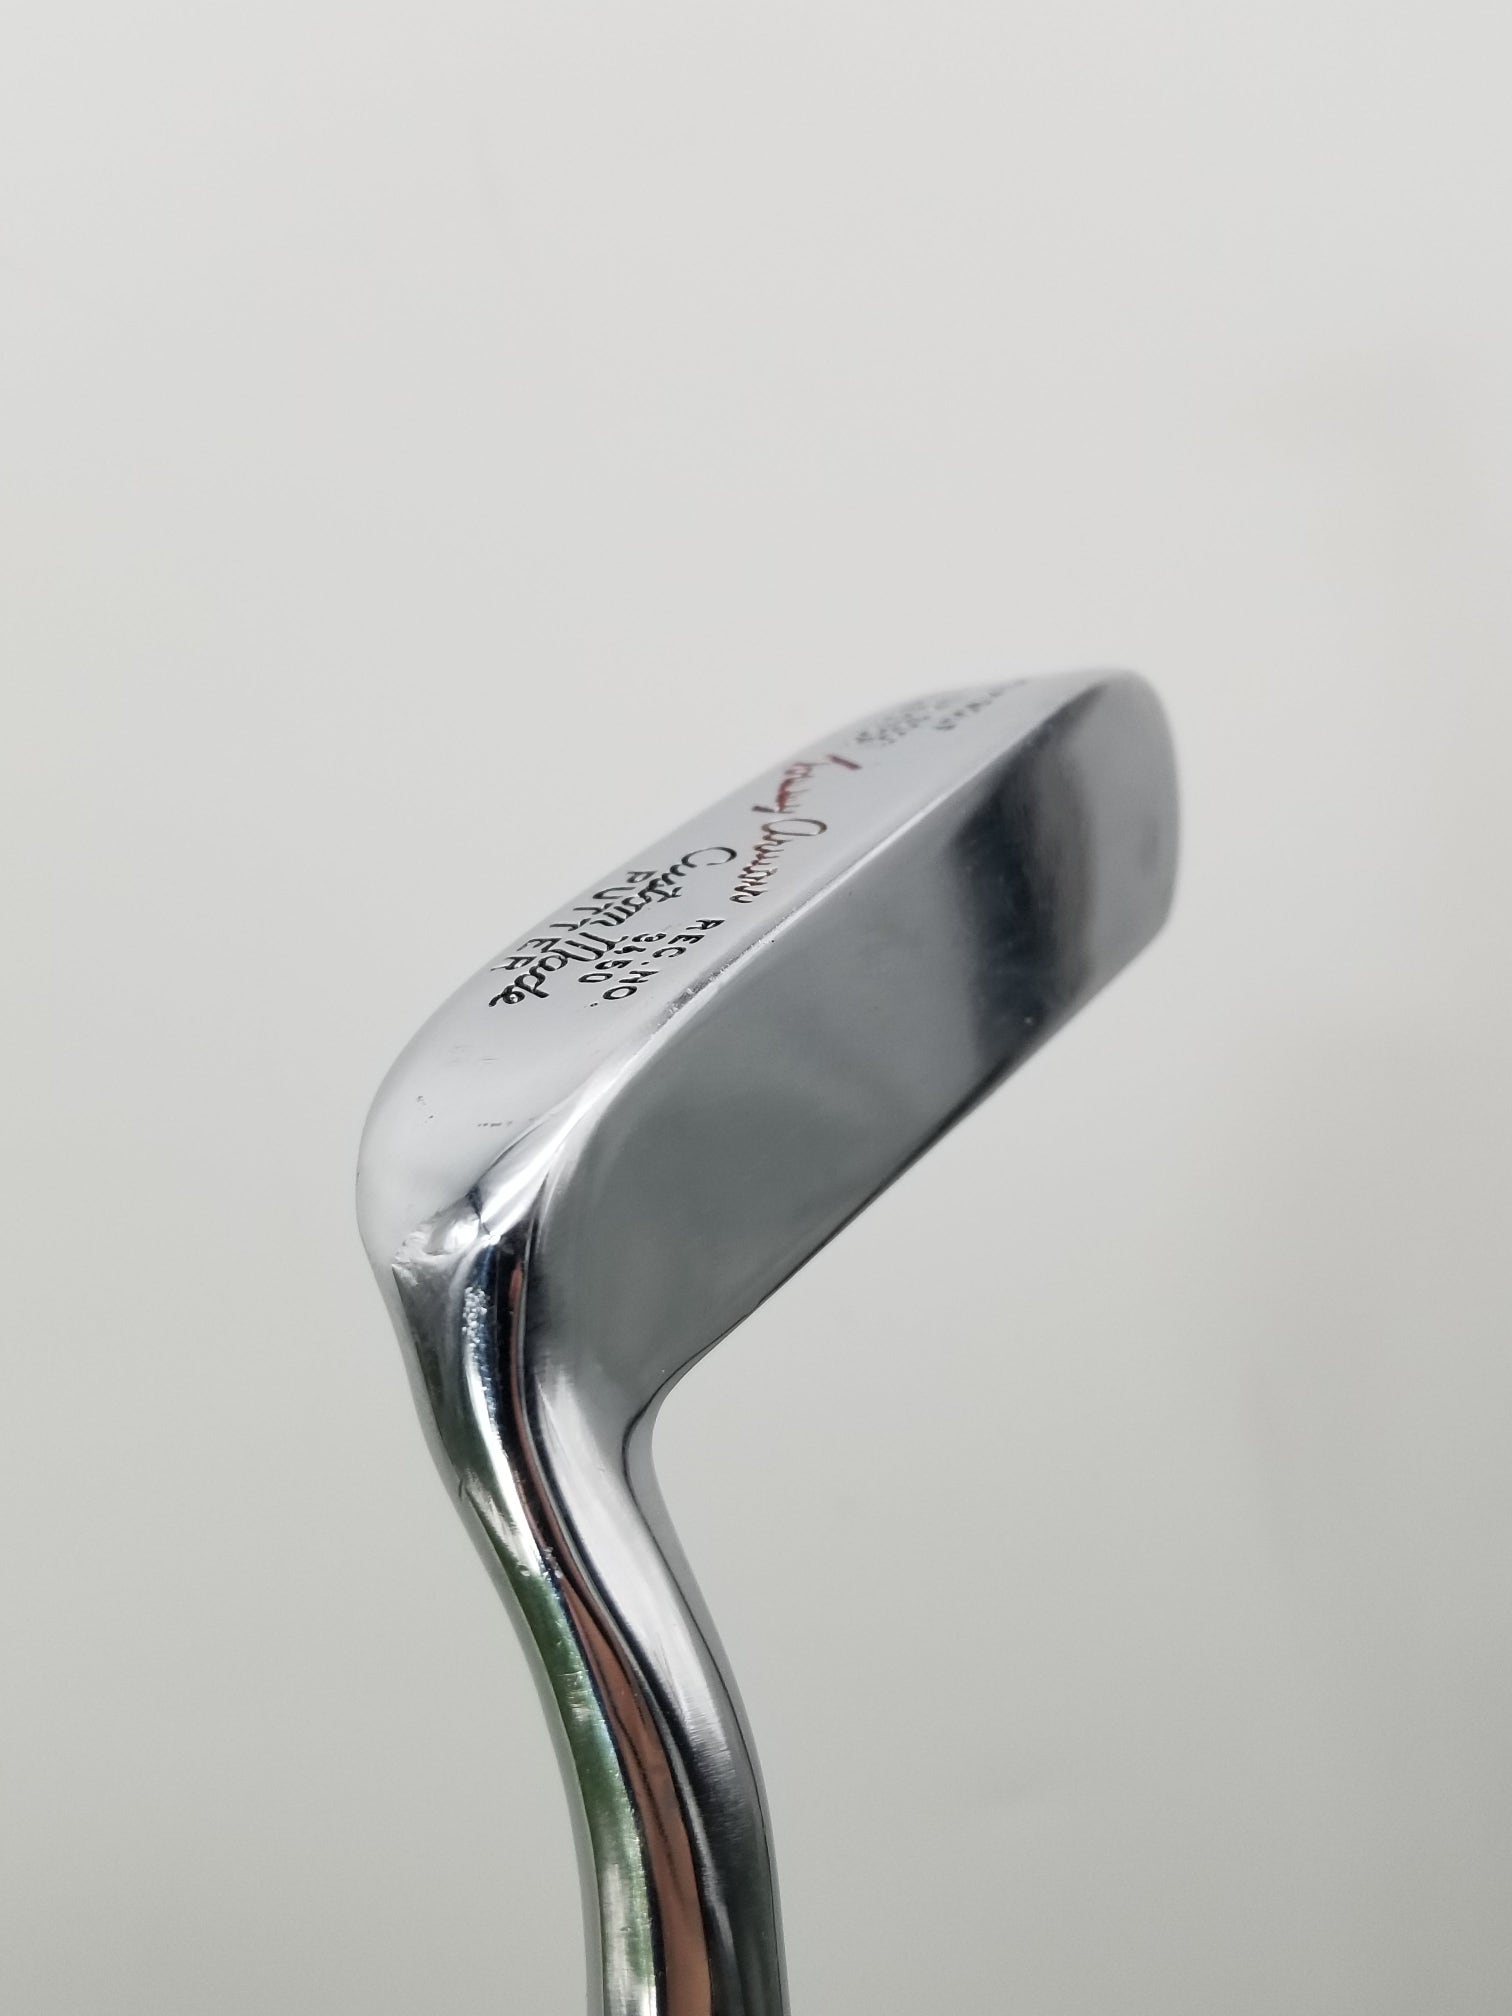 TOMMY ARMOUR SILVER SCOTT PGA GOLF PUTTER 34.5" VERYGOOD